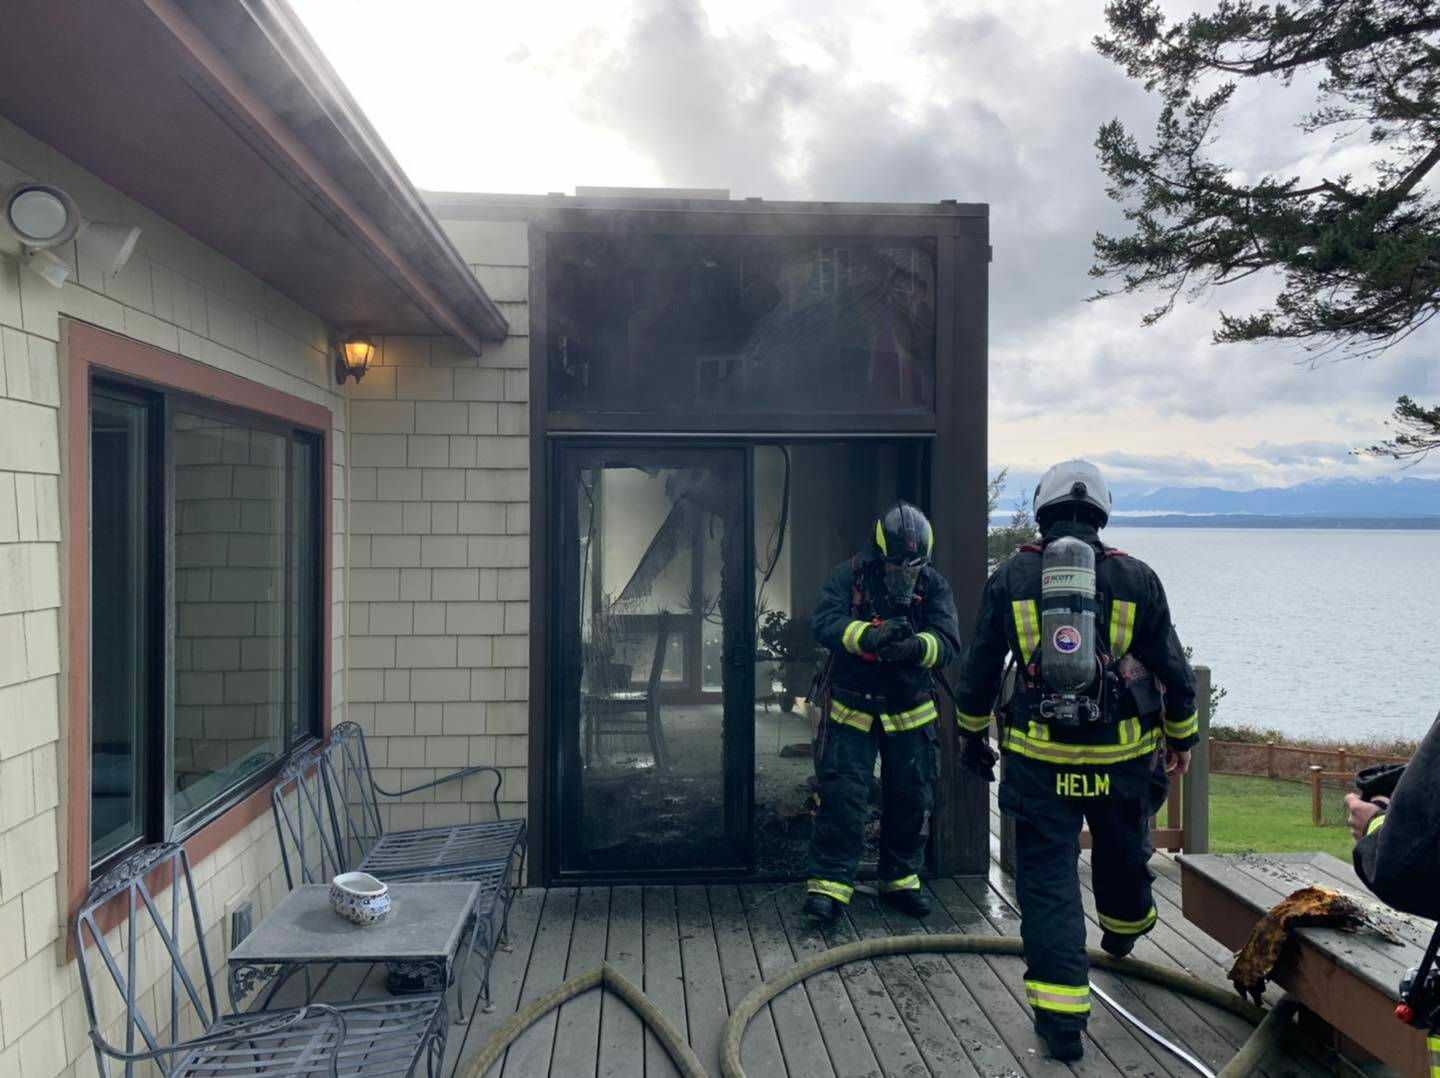 Photo provided
Firefighters put out a residential fire in Coupeville Feb. 2.